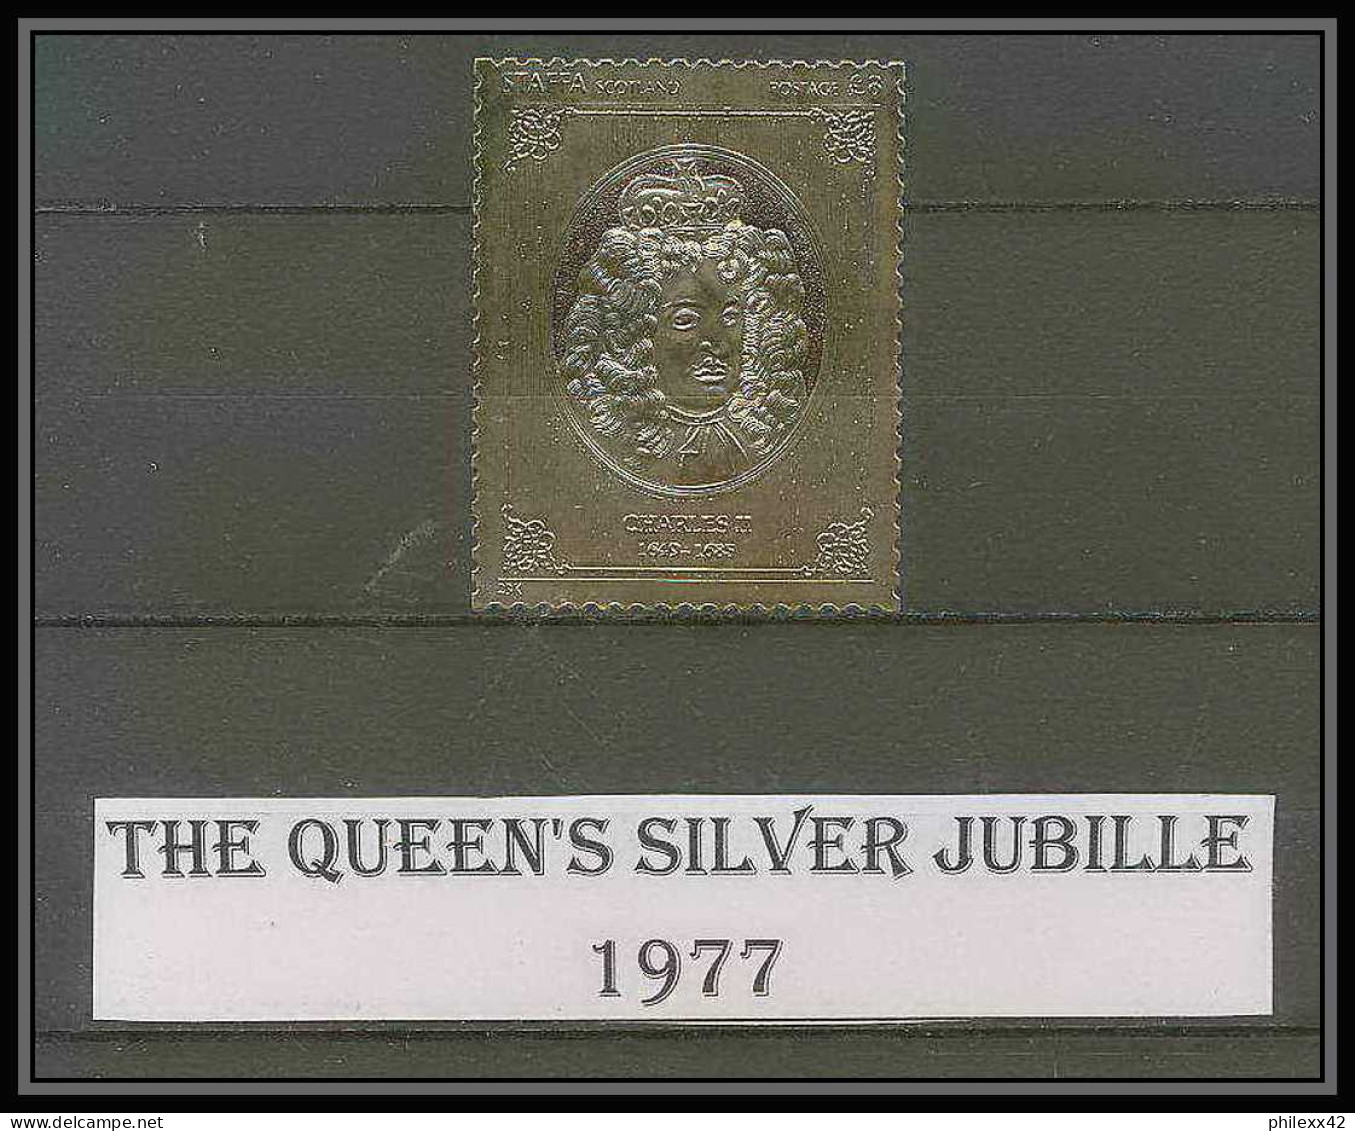 461 Staffa Scotland The Queen's Silver Jubilee 1977 OR Gold Stamps Monarchy United Kingdom Charles 2 Type 1 Neuf** Mnh - Emisiones Locales